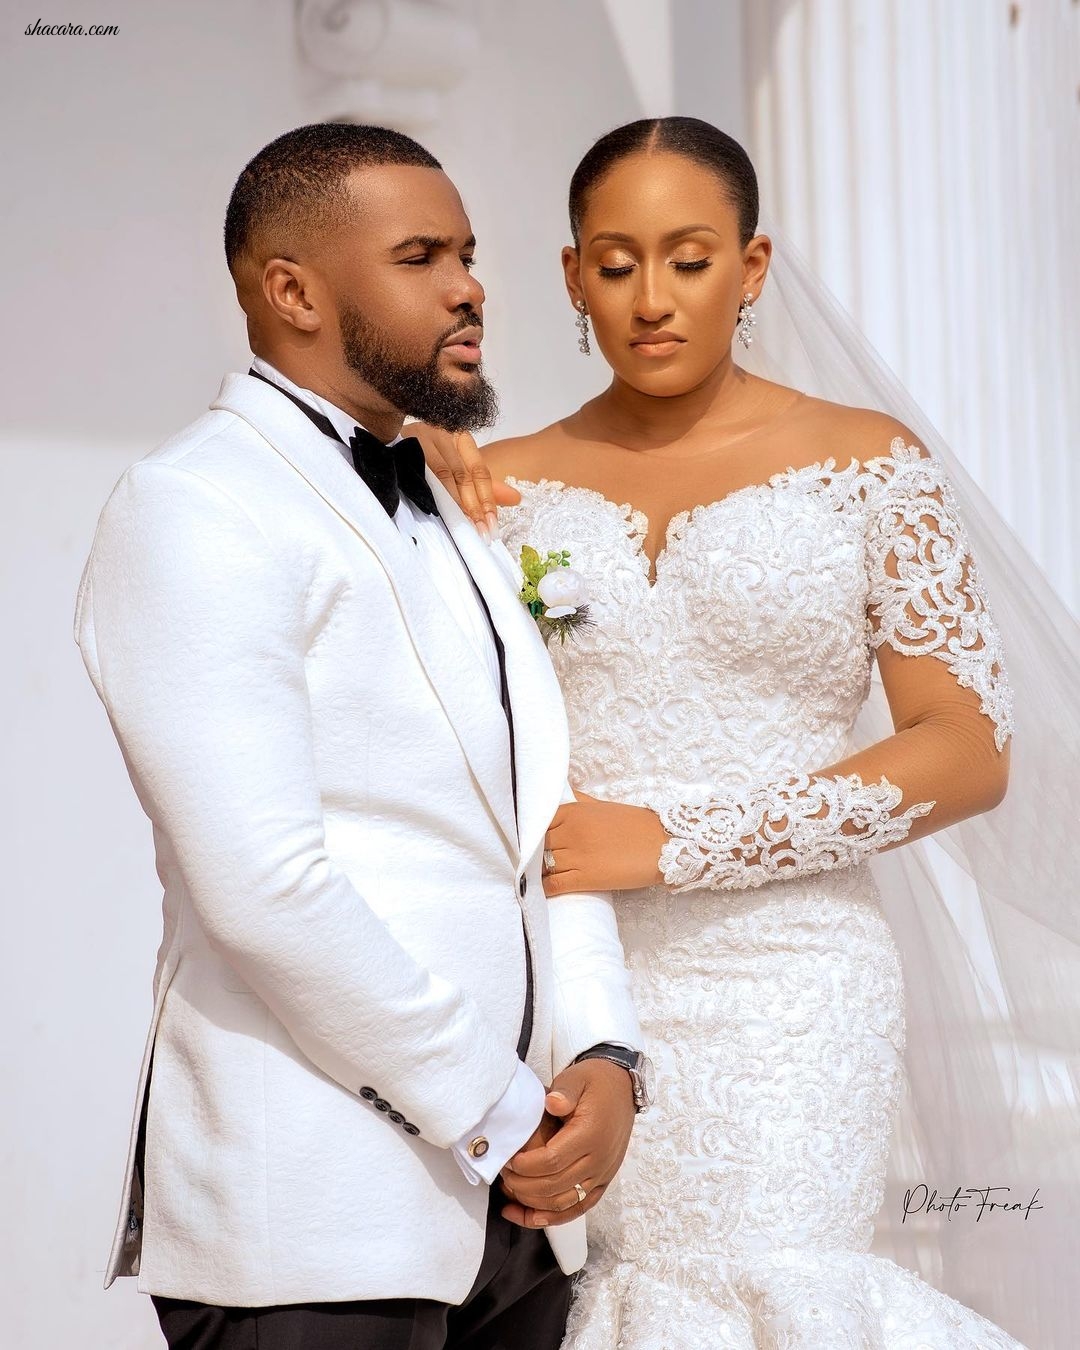 Ini Edo’s Show-Stopping Designer Look For Williams Uchemba’s Wedding Is A Must-See